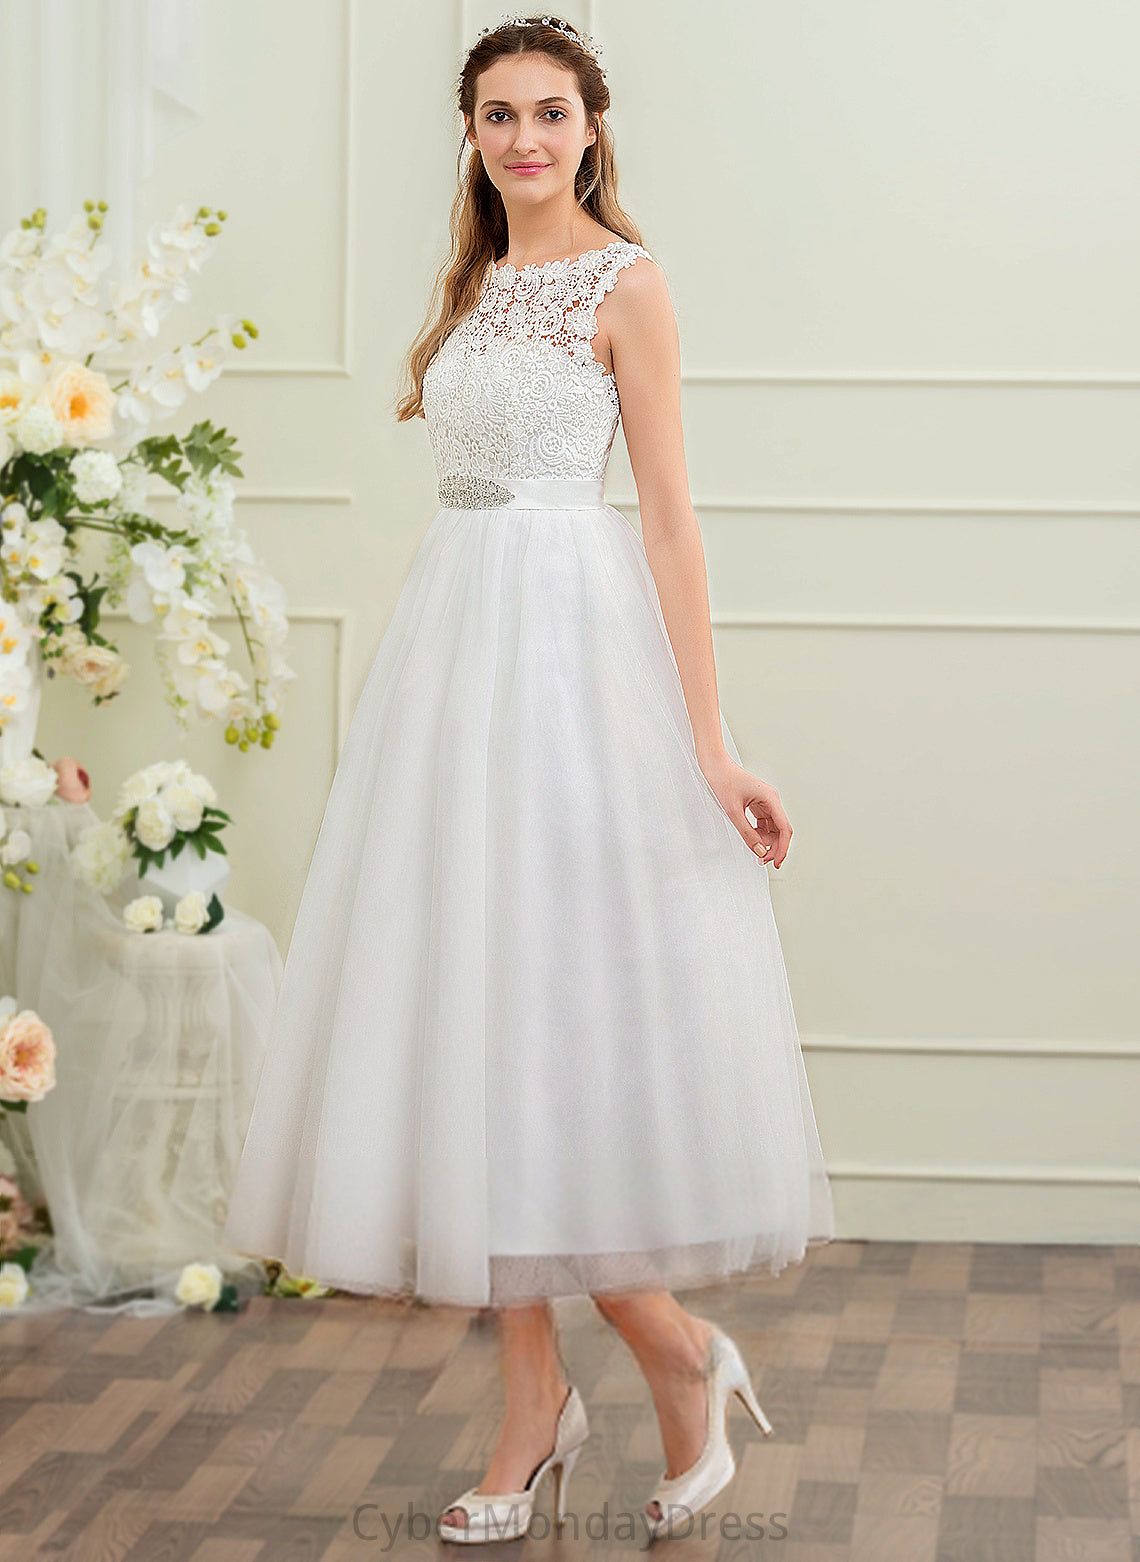 With Tea-Length Sequins Beading Eden Wedding Dresses Satin Dress Wedding Lace Ball-Gown/Princess Tulle